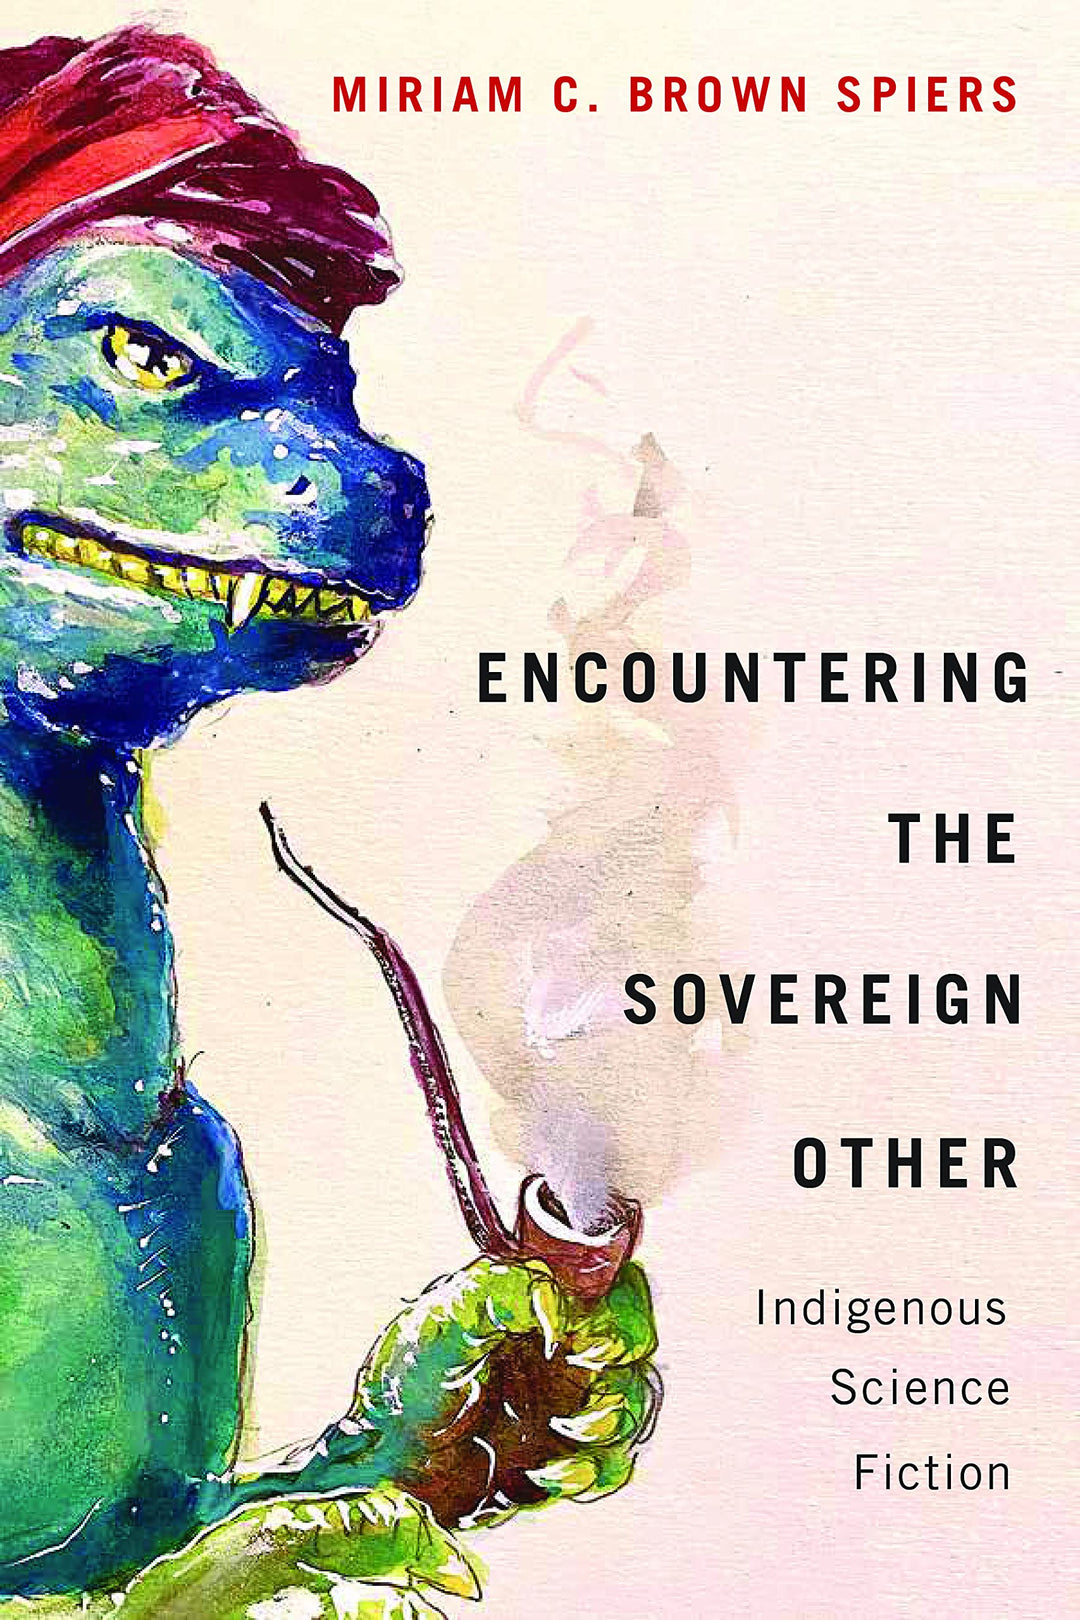  Encountering the Sovereign Other: Indigenous Science Fiction by Miriam C. Brown Spiers